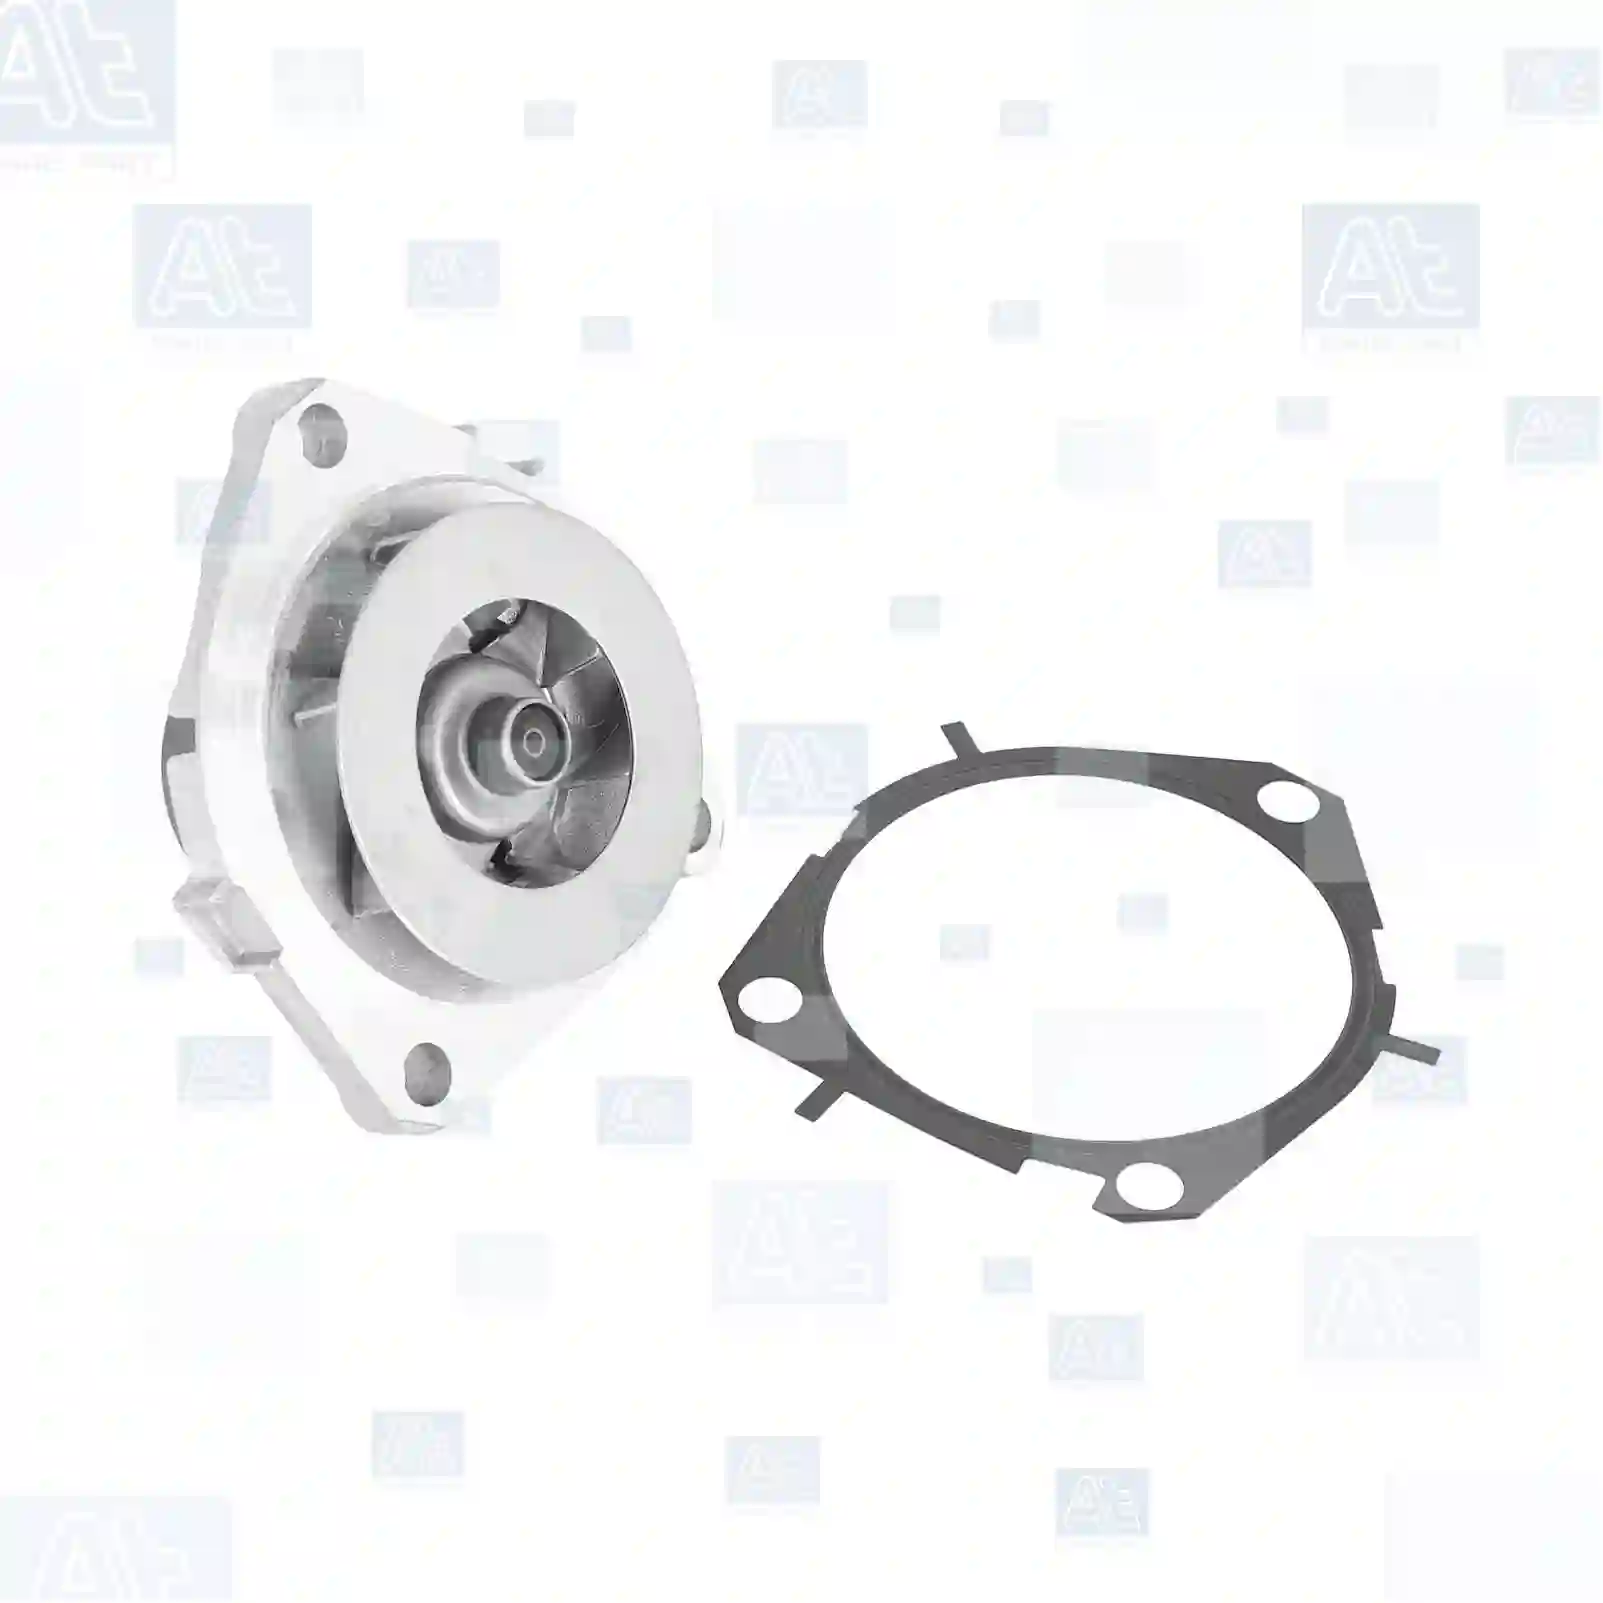 Water pump, at no 77707464, oem no: 46804051, 55209993, 55268918, 55268919, 55269148, 55488983, PA10017, 55568637, 93179114, 93191762, 55209993, 55568637, 93179114, 46804051, 55209993, 1612703180, 46804051, 55209993, 55268918, 55269148, 55488983, 13386917, 13386920, 25875090, 55268918, 55488983, 55568637, 93179114, 93191762, 55268918, 55268918, 55269148, K68096225AA, 46804051, 55209993, 55268918, 55269148, 55488983, 1334147, 1334153, 1334167, 1334183, 1334186, 1334242, 1334284, 1612703180, 55488983, 55568637, 93179114, 93191762, 17400-55P00, 17400-79J80, 17400-79J81 At Spare Part | Engine, Accelerator Pedal, Camshaft, Connecting Rod, Crankcase, Crankshaft, Cylinder Head, Engine Suspension Mountings, Exhaust Manifold, Exhaust Gas Recirculation, Filter Kits, Flywheel Housing, General Overhaul Kits, Engine, Intake Manifold, Oil Cleaner, Oil Cooler, Oil Filter, Oil Pump, Oil Sump, Piston & Liner, Sensor & Switch, Timing Case, Turbocharger, Cooling System, Belt Tensioner, Coolant Filter, Coolant Pipe, Corrosion Prevention Agent, Drive, Expansion Tank, Fan, Intercooler, Monitors & Gauges, Radiator, Thermostat, V-Belt / Timing belt, Water Pump, Fuel System, Electronical Injector Unit, Feed Pump, Fuel Filter, cpl., Fuel Gauge Sender,  Fuel Line, Fuel Pump, Fuel Tank, Injection Line Kit, Injection Pump, Exhaust System, Clutch & Pedal, Gearbox, Propeller Shaft, Axles, Brake System, Hubs & Wheels, Suspension, Leaf Spring, Universal Parts / Accessories, Steering, Electrical System, Cabin Water pump, at no 77707464, oem no: 46804051, 55209993, 55268918, 55268919, 55269148, 55488983, PA10017, 55568637, 93179114, 93191762, 55209993, 55568637, 93179114, 46804051, 55209993, 1612703180, 46804051, 55209993, 55268918, 55269148, 55488983, 13386917, 13386920, 25875090, 55268918, 55488983, 55568637, 93179114, 93191762, 55268918, 55268918, 55269148, K68096225AA, 46804051, 55209993, 55268918, 55269148, 55488983, 1334147, 1334153, 1334167, 1334183, 1334186, 1334242, 1334284, 1612703180, 55488983, 55568637, 93179114, 93191762, 17400-55P00, 17400-79J80, 17400-79J81 At Spare Part | Engine, Accelerator Pedal, Camshaft, Connecting Rod, Crankcase, Crankshaft, Cylinder Head, Engine Suspension Mountings, Exhaust Manifold, Exhaust Gas Recirculation, Filter Kits, Flywheel Housing, General Overhaul Kits, Engine, Intake Manifold, Oil Cleaner, Oil Cooler, Oil Filter, Oil Pump, Oil Sump, Piston & Liner, Sensor & Switch, Timing Case, Turbocharger, Cooling System, Belt Tensioner, Coolant Filter, Coolant Pipe, Corrosion Prevention Agent, Drive, Expansion Tank, Fan, Intercooler, Monitors & Gauges, Radiator, Thermostat, V-Belt / Timing belt, Water Pump, Fuel System, Electronical Injector Unit, Feed Pump, Fuel Filter, cpl., Fuel Gauge Sender,  Fuel Line, Fuel Pump, Fuel Tank, Injection Line Kit, Injection Pump, Exhaust System, Clutch & Pedal, Gearbox, Propeller Shaft, Axles, Brake System, Hubs & Wheels, Suspension, Leaf Spring, Universal Parts / Accessories, Steering, Electrical System, Cabin